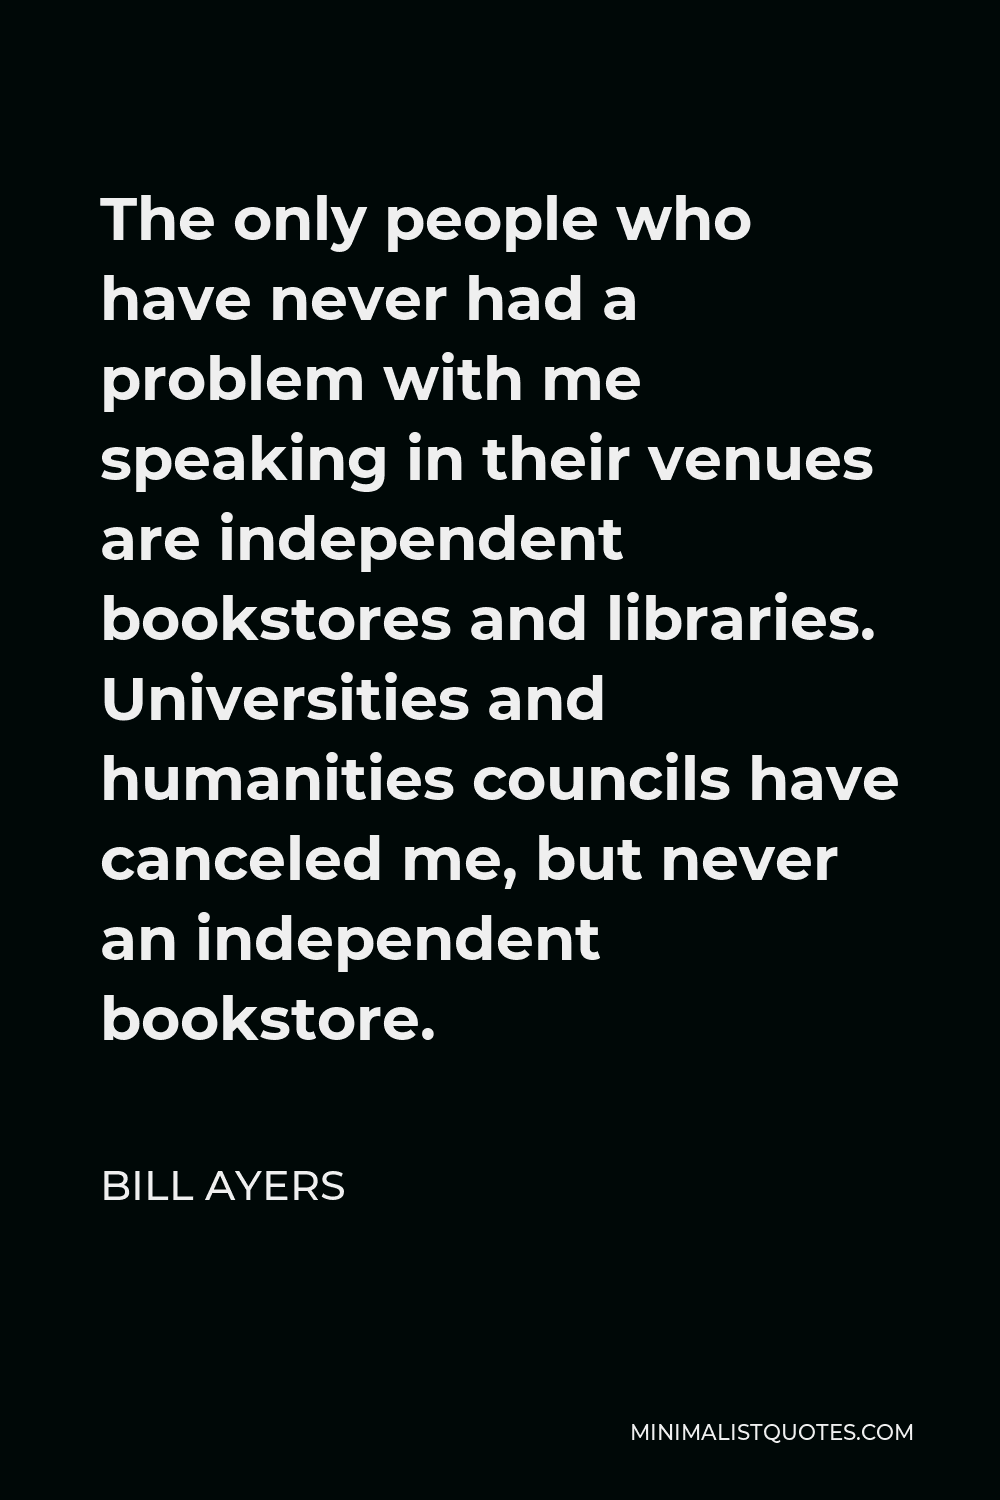 Bill Ayers Quote - The only people who have never had a problem with me speaking in their venues are independent bookstores and libraries. Universities and humanities councils have canceled me, but never an independent bookstore.